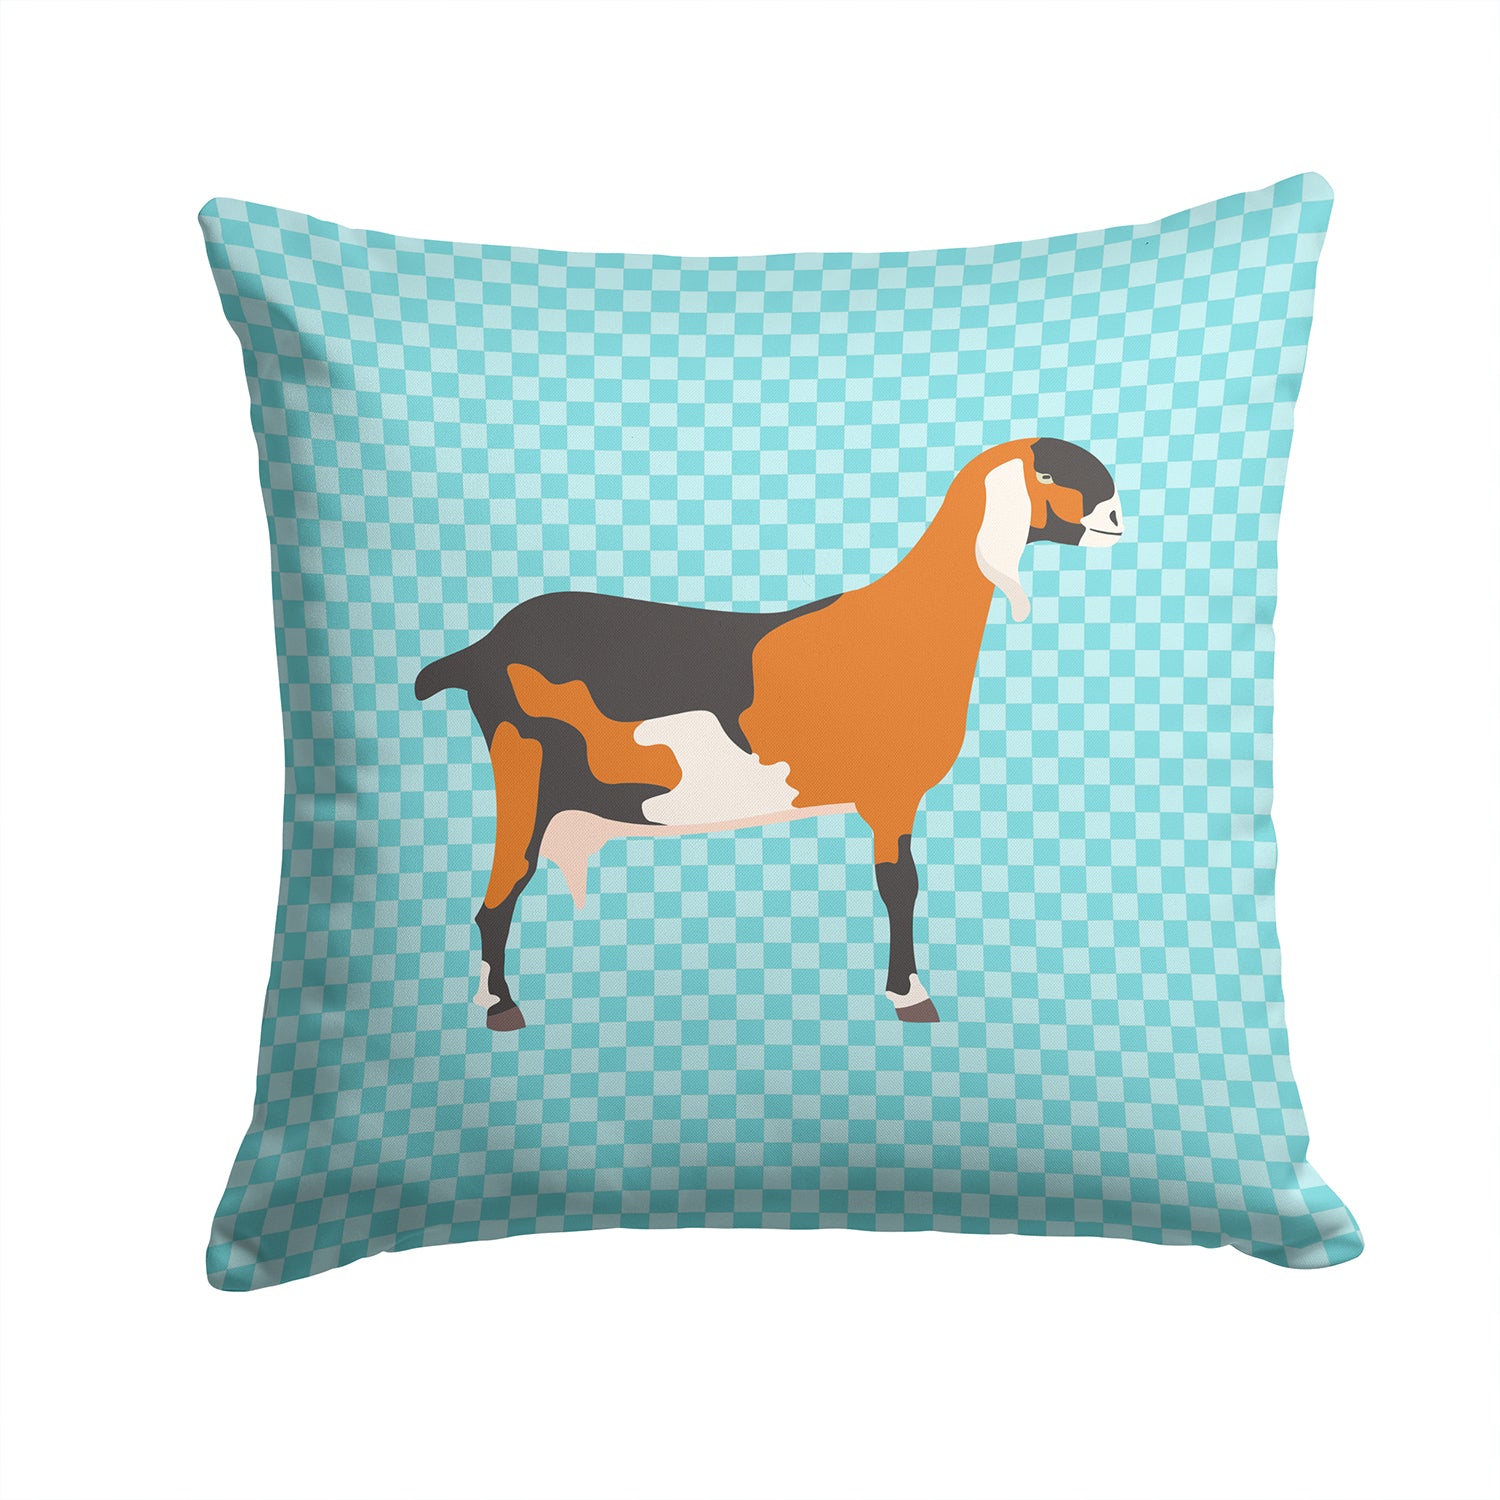 Anglo-nubian Nubian Goat Blue Check Fabric Decorative Pillow BB8057PW1414 - the-store.com